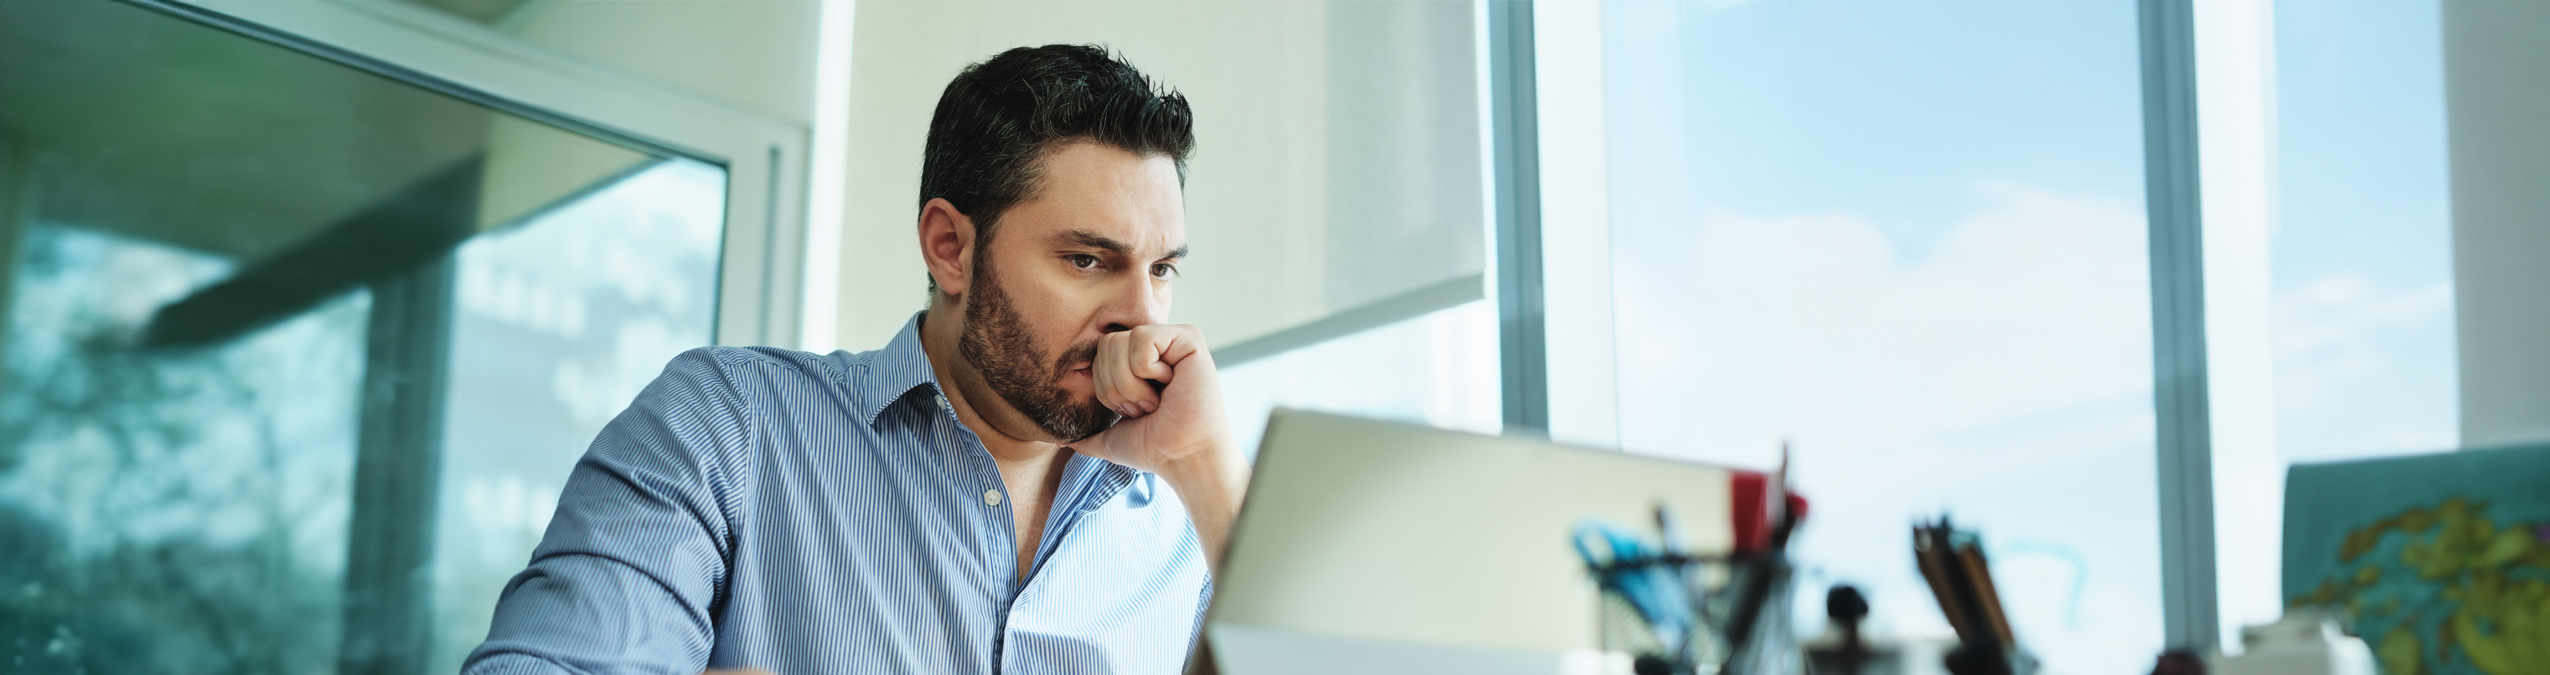 Worried man sitting in his office staring at a computer